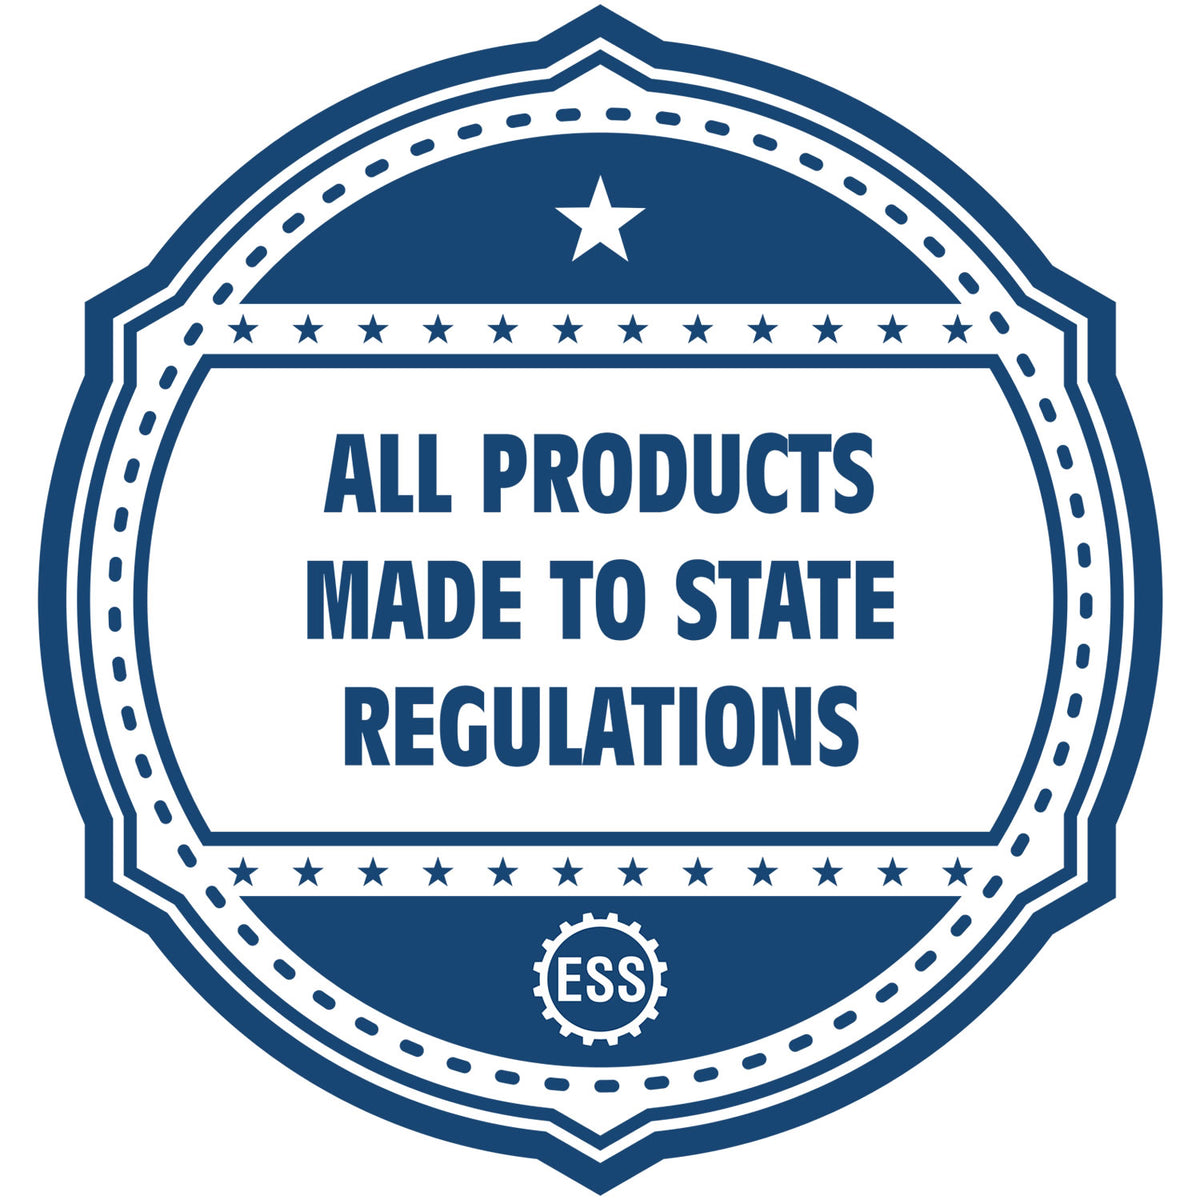 An icon or badge element for the Slim Pre-Inked Delaware Landscape Architect Seal Stamp showing that this product is made in compliance with state regulations.